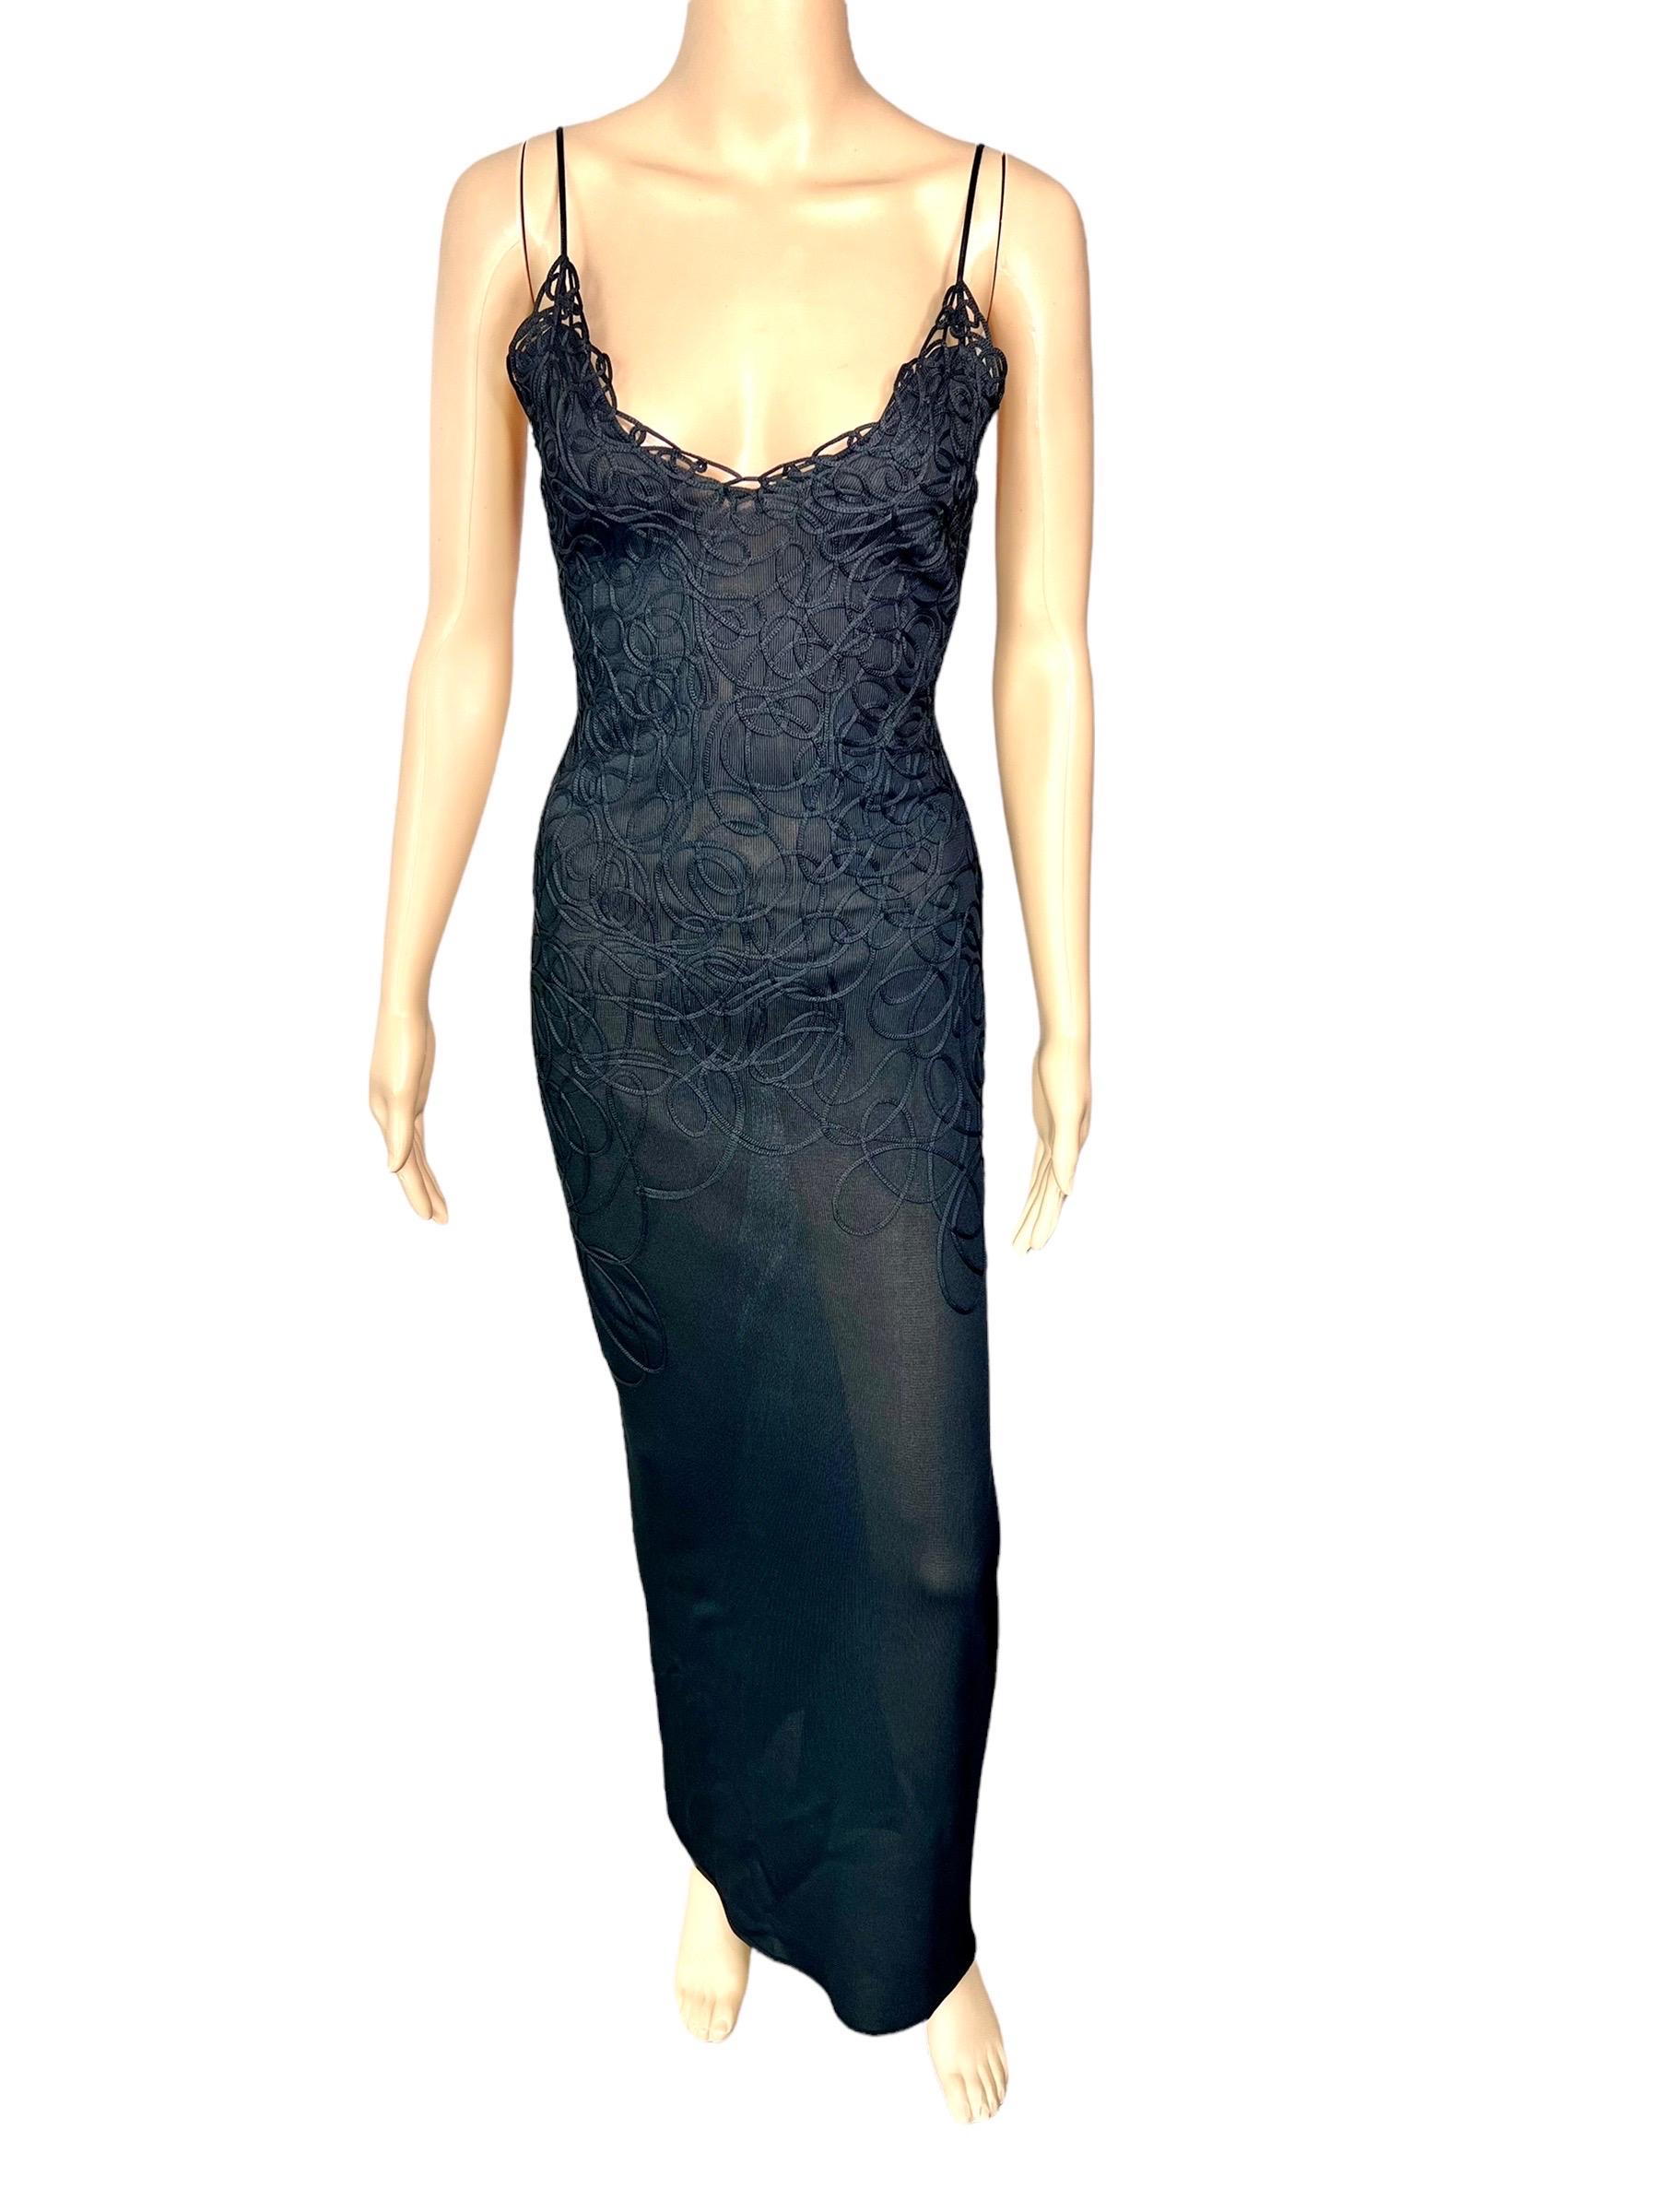 Women's Thierry Mugler Vintage Embroidered Semi-Sheer Knit Bodycon Black Maxi Dress 